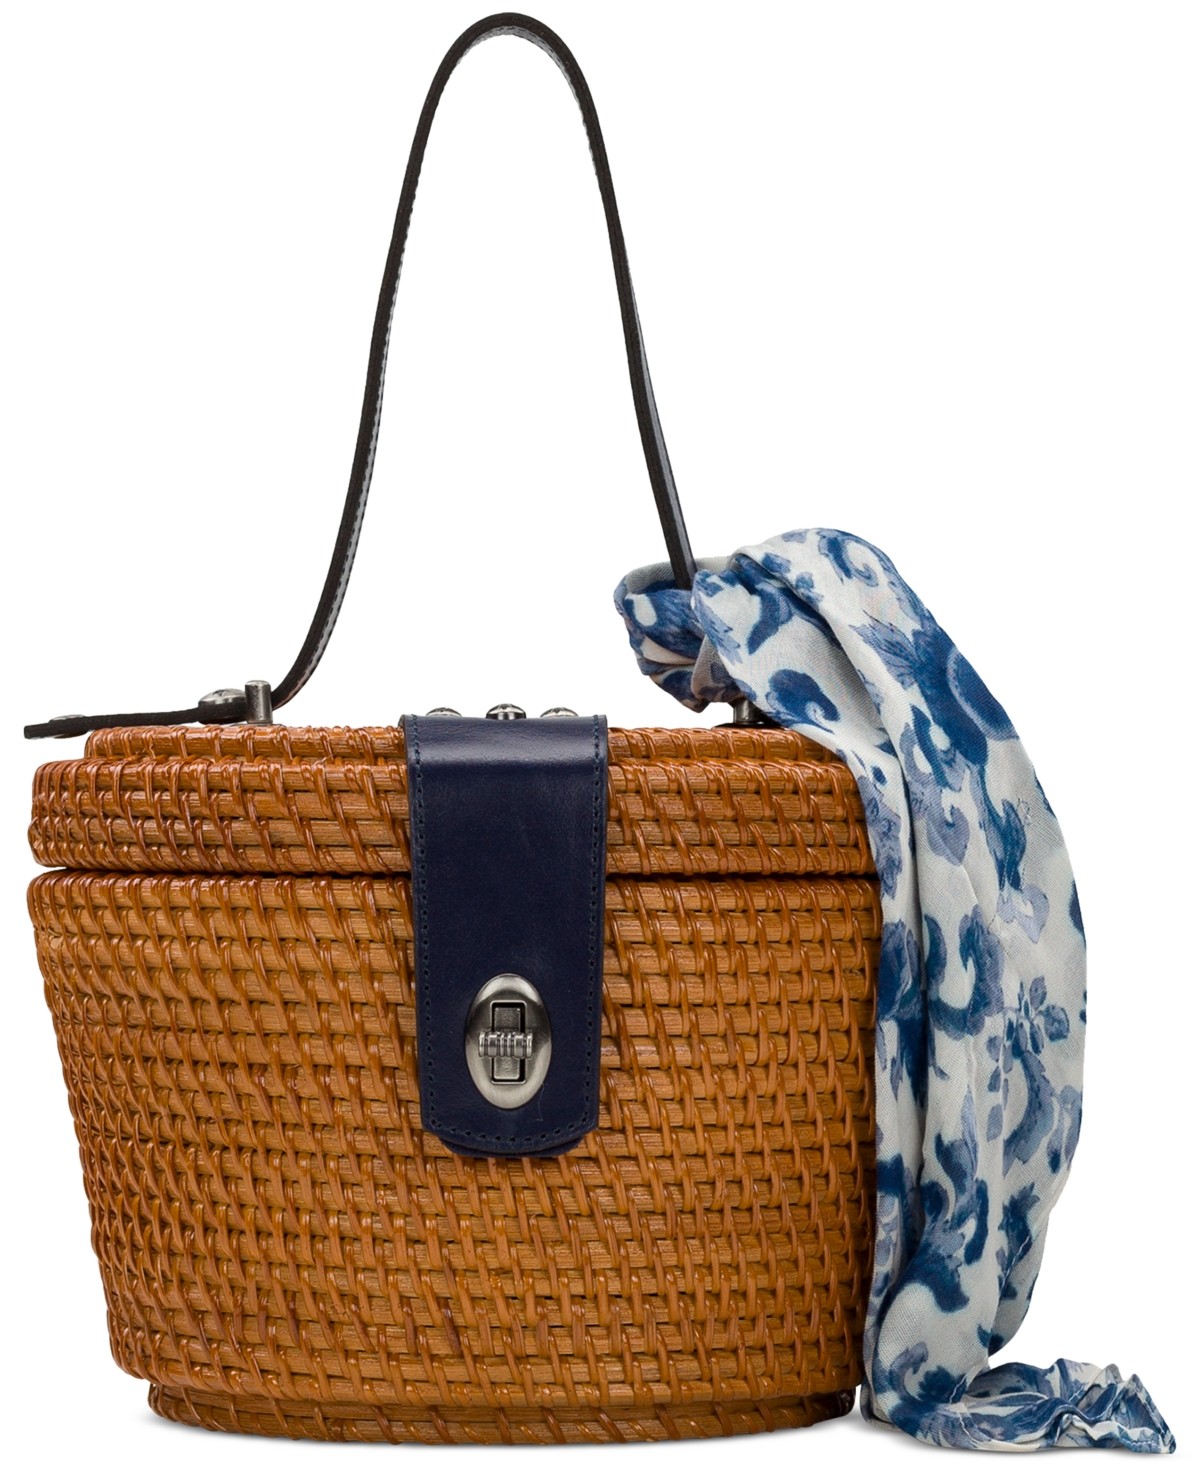 Caselle Small Wicker Basket Bag with Scarf - Natural/Oceano